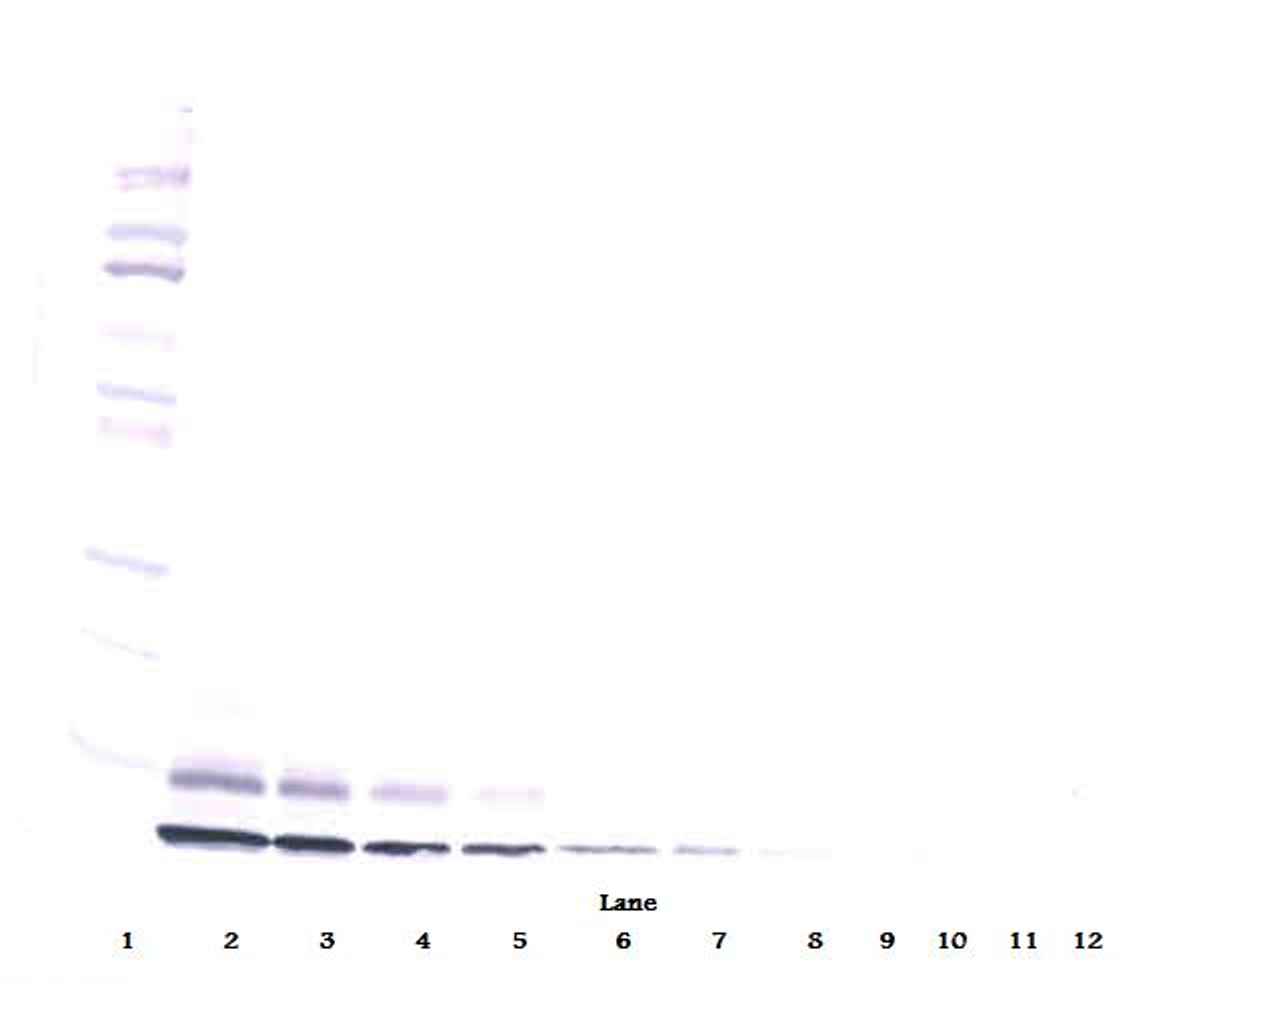 To detect hIGF-II by Western Blot analysis this antibody can be used at a concentration of 0.1 - 0.2 ug/ml. Used in conjunction with compatible secondary reagents the detection limit for recombinant hIGF-II is 1.5 - 3.0 ng/lane, under either reducing or non-reducing conditions.